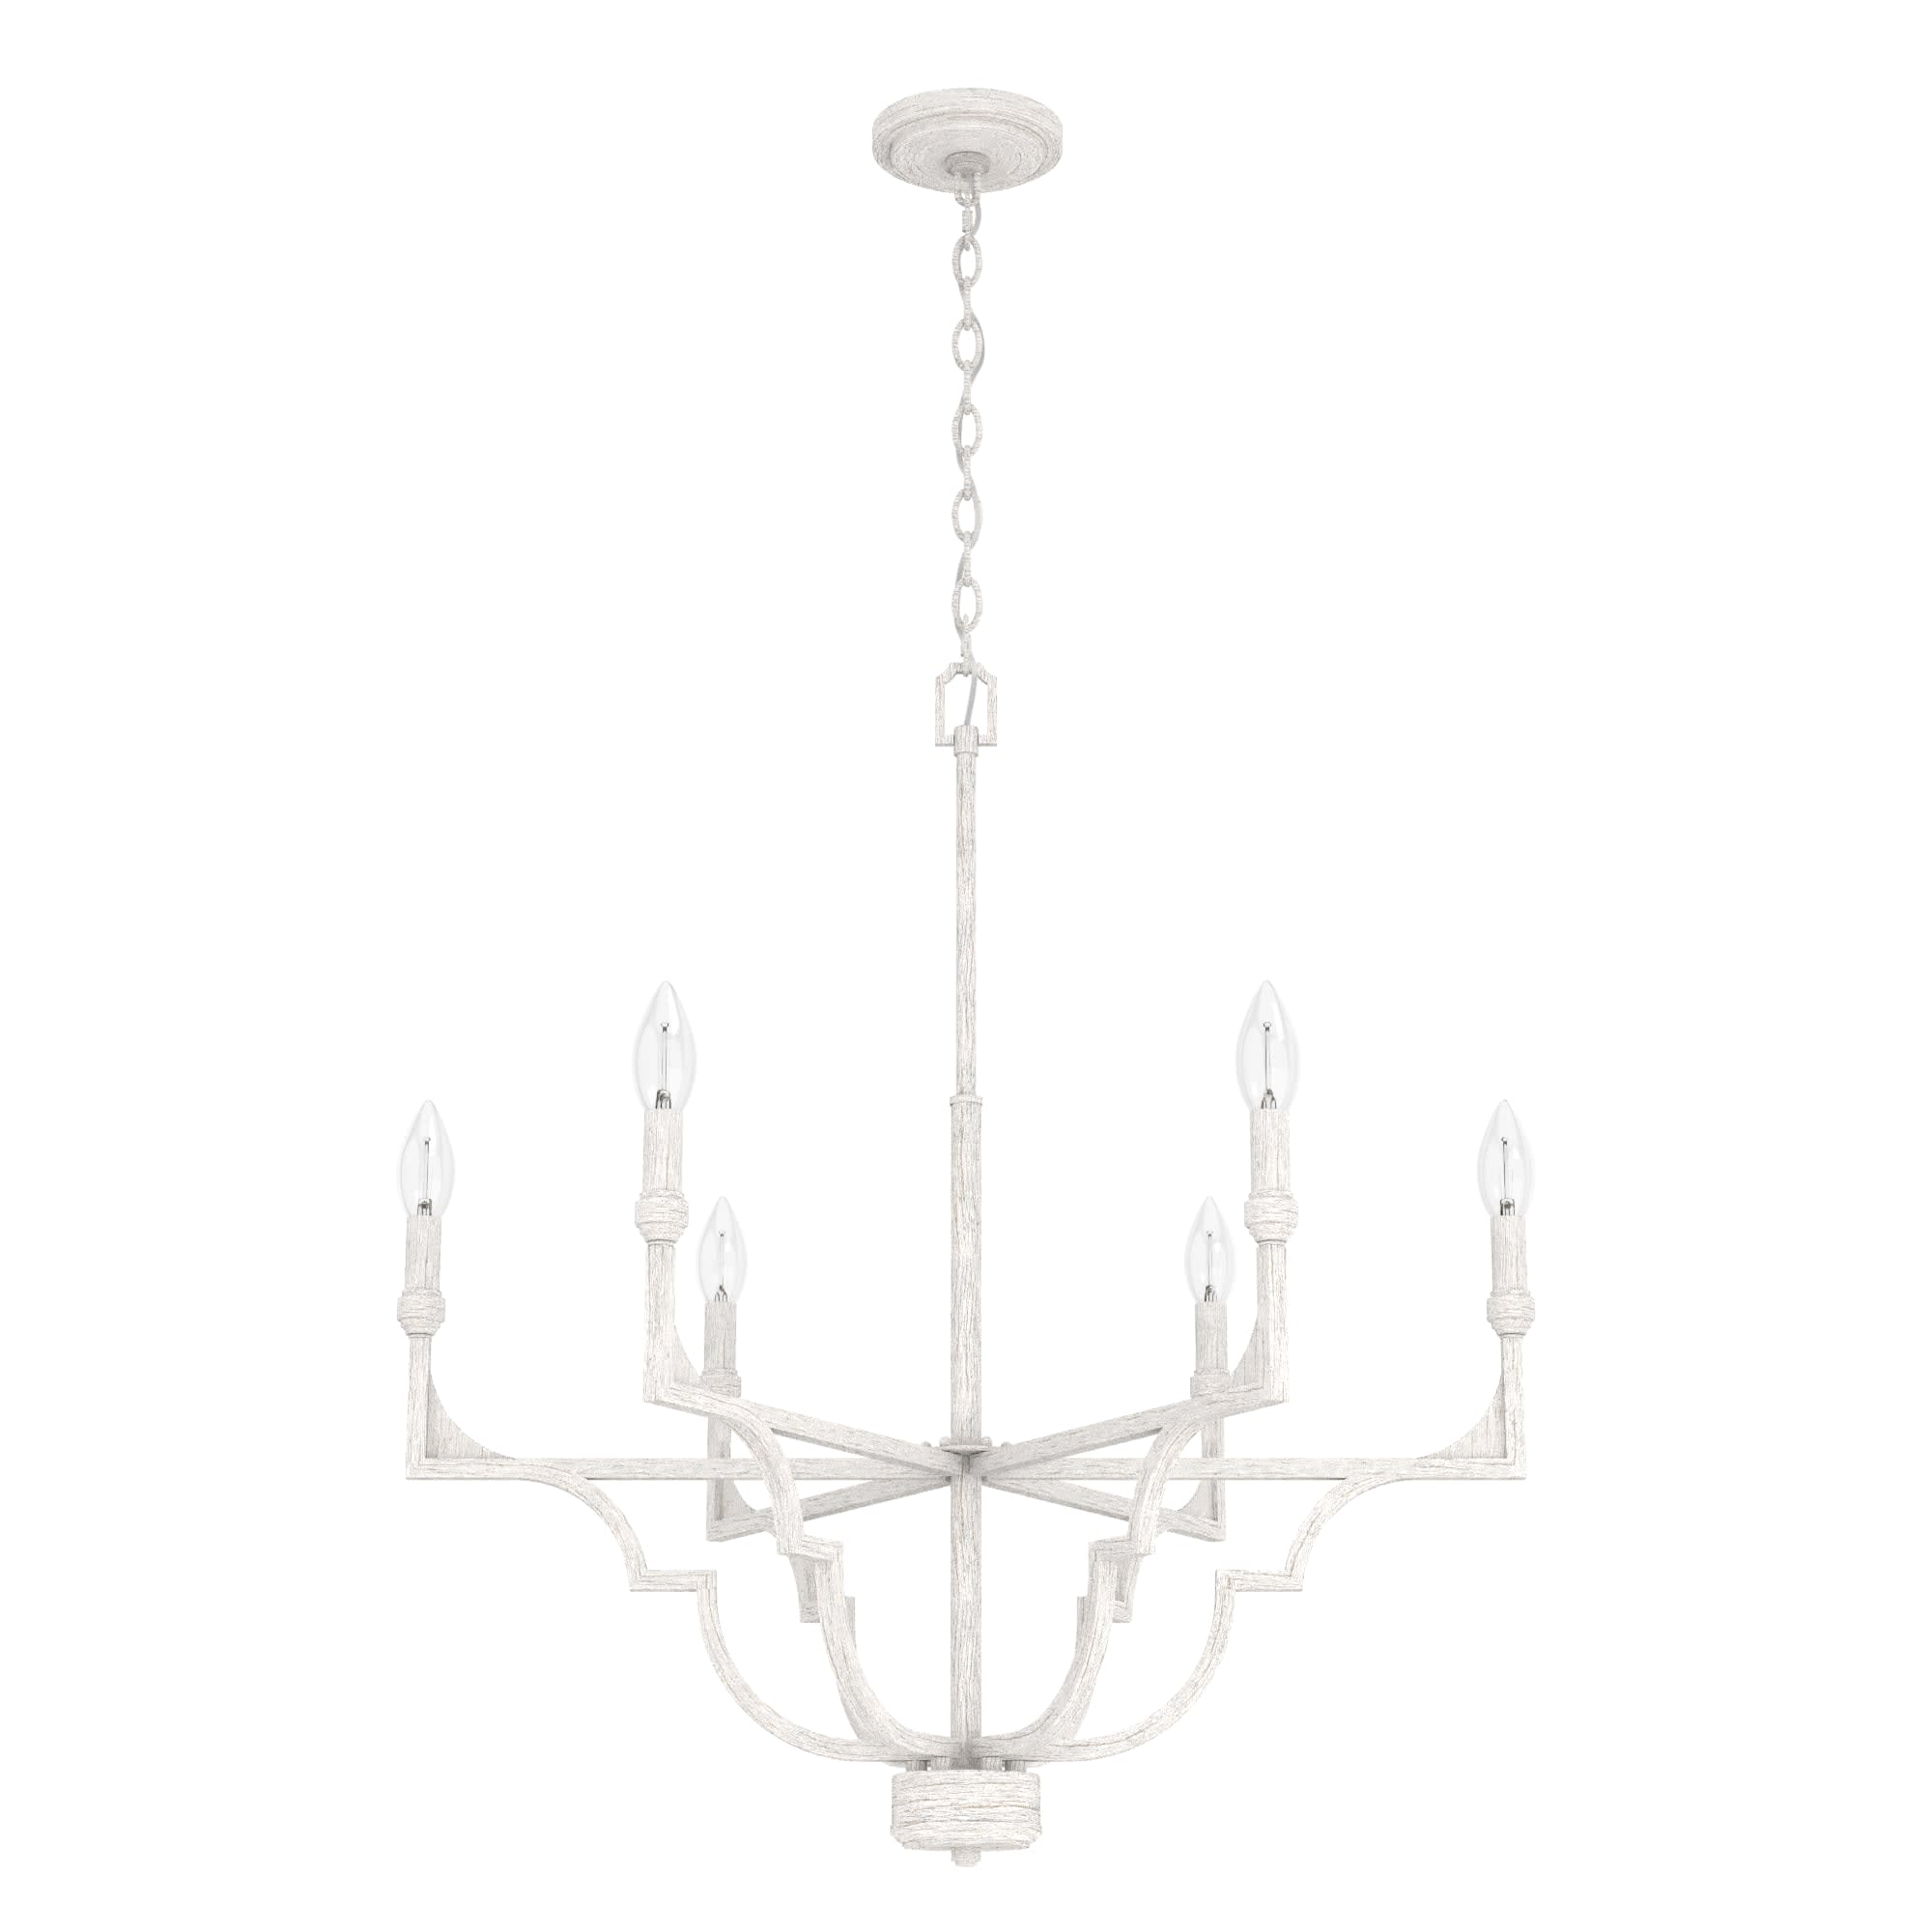 19288 Highland Hill Chandelier in Distressed White